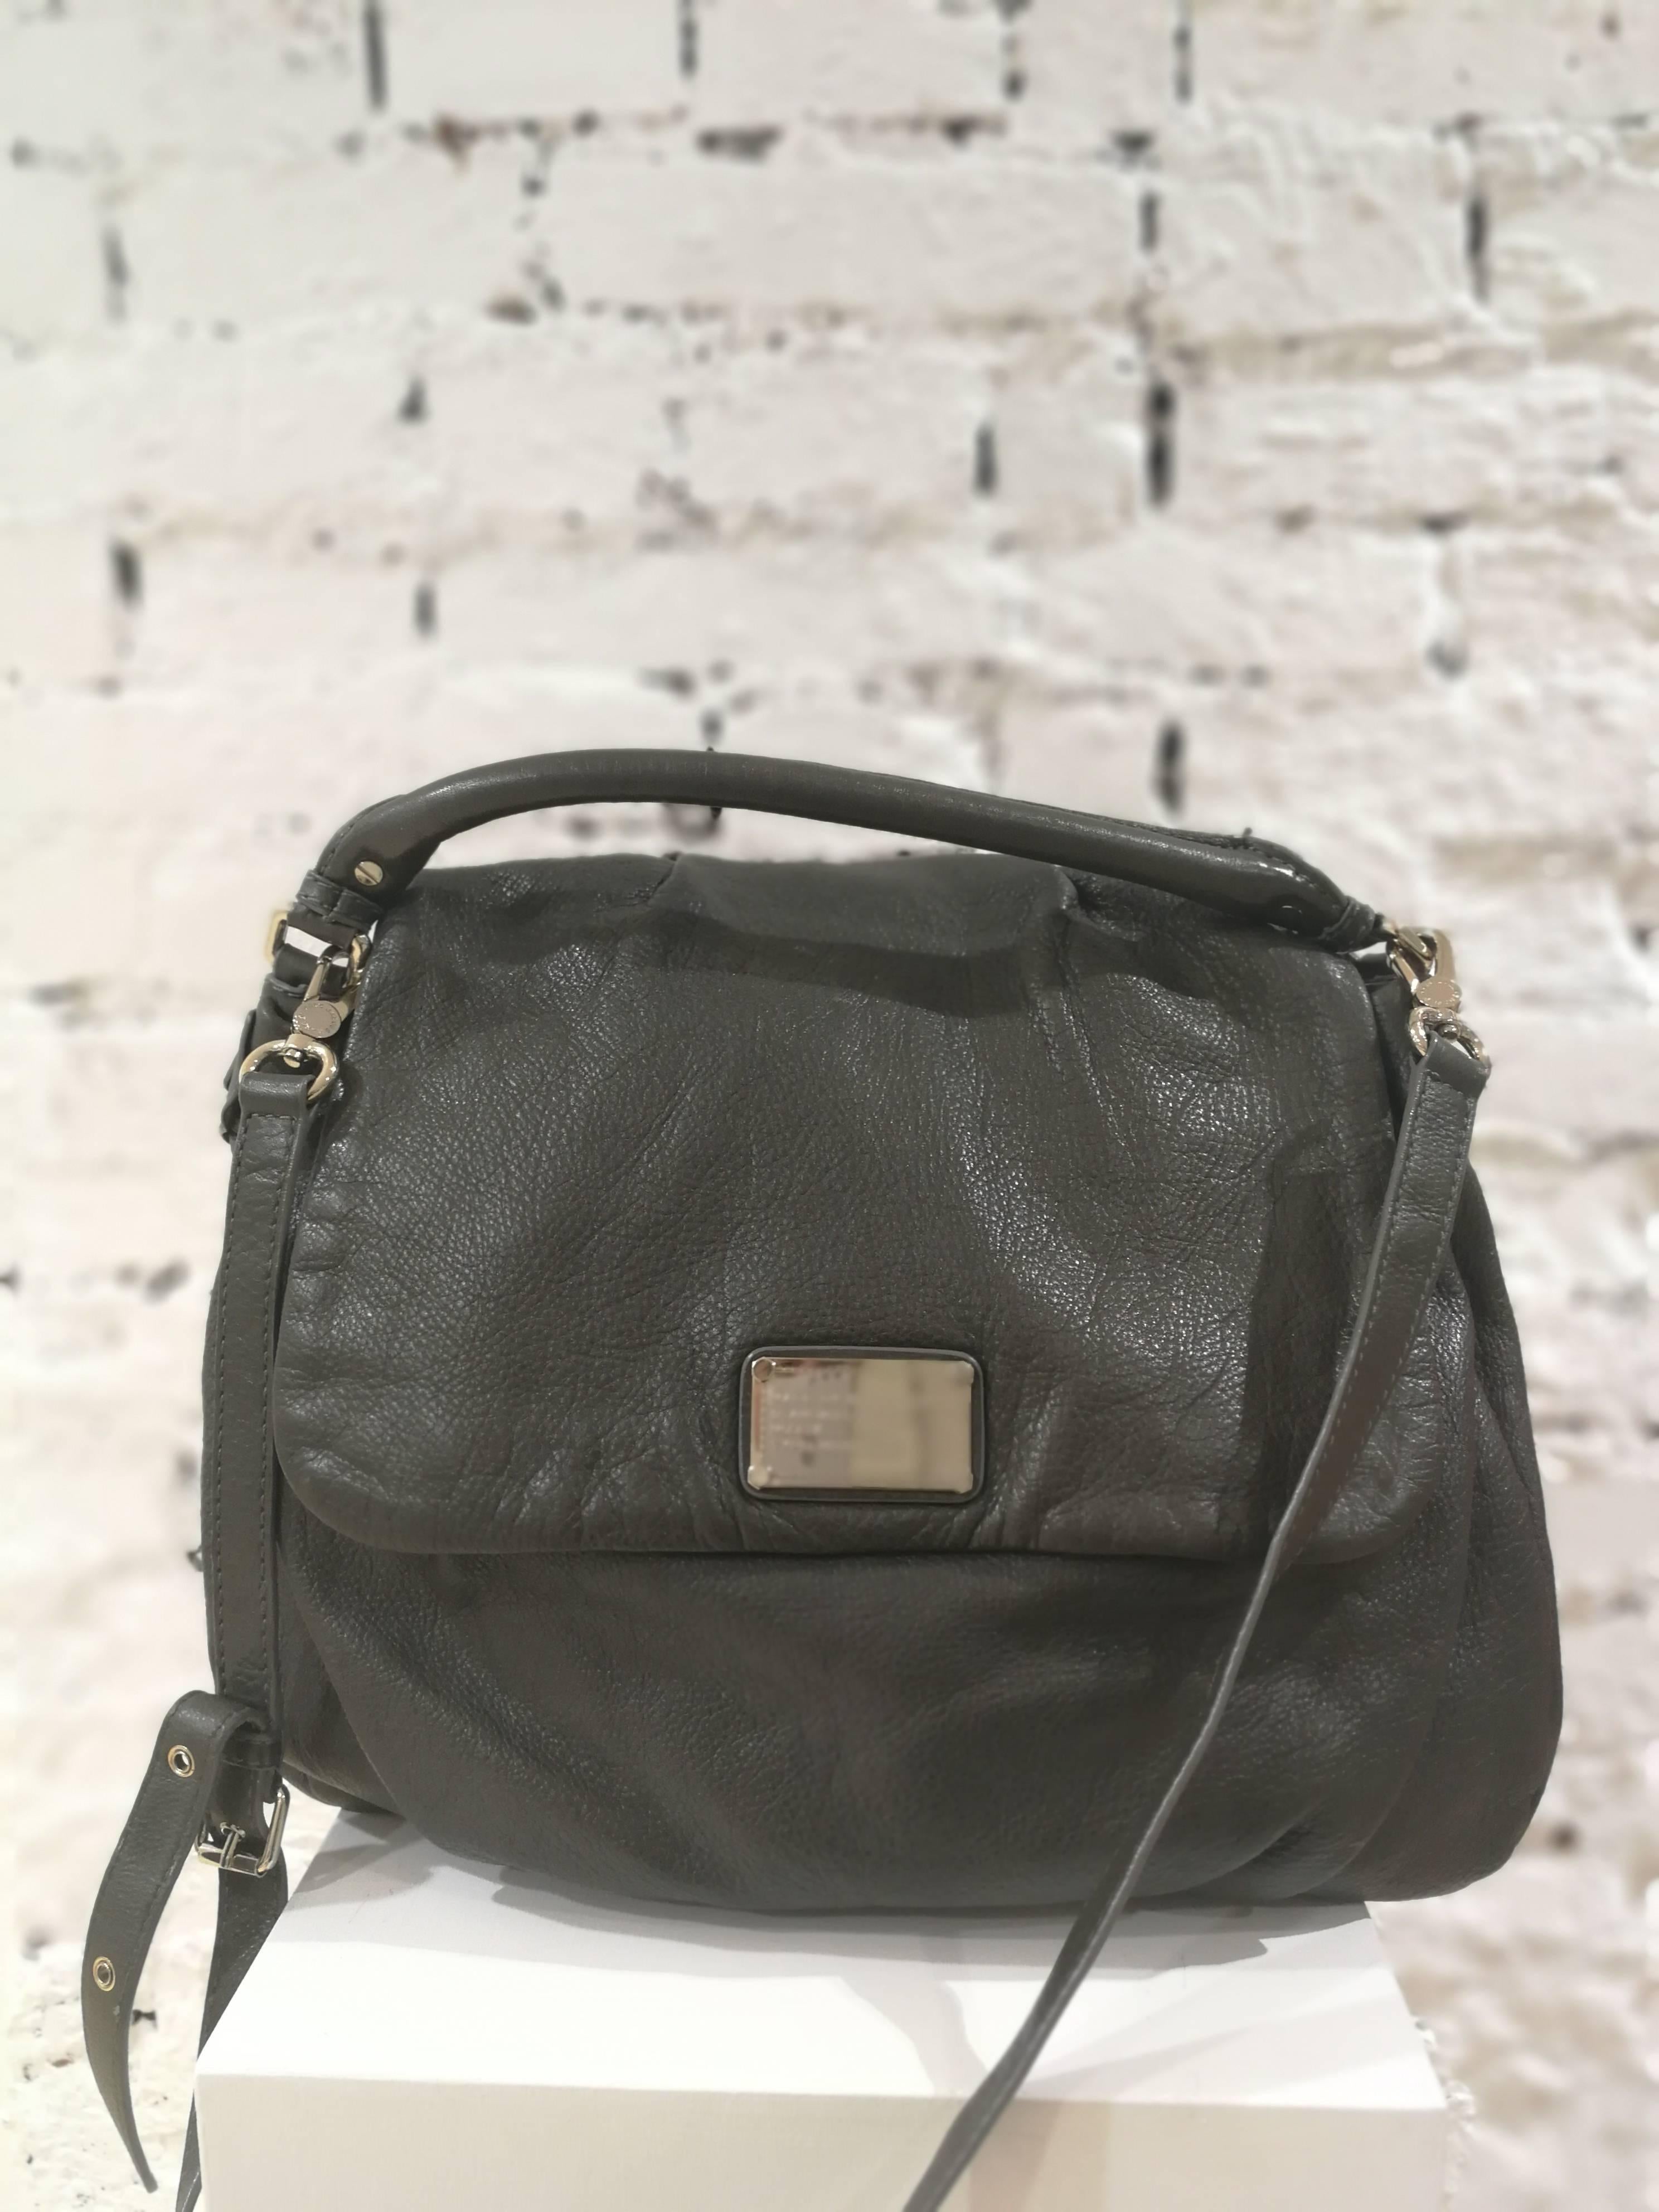 Marc Jacobs Workwear Shoulder Bag In Excellent Condition For Sale In Capri, IT